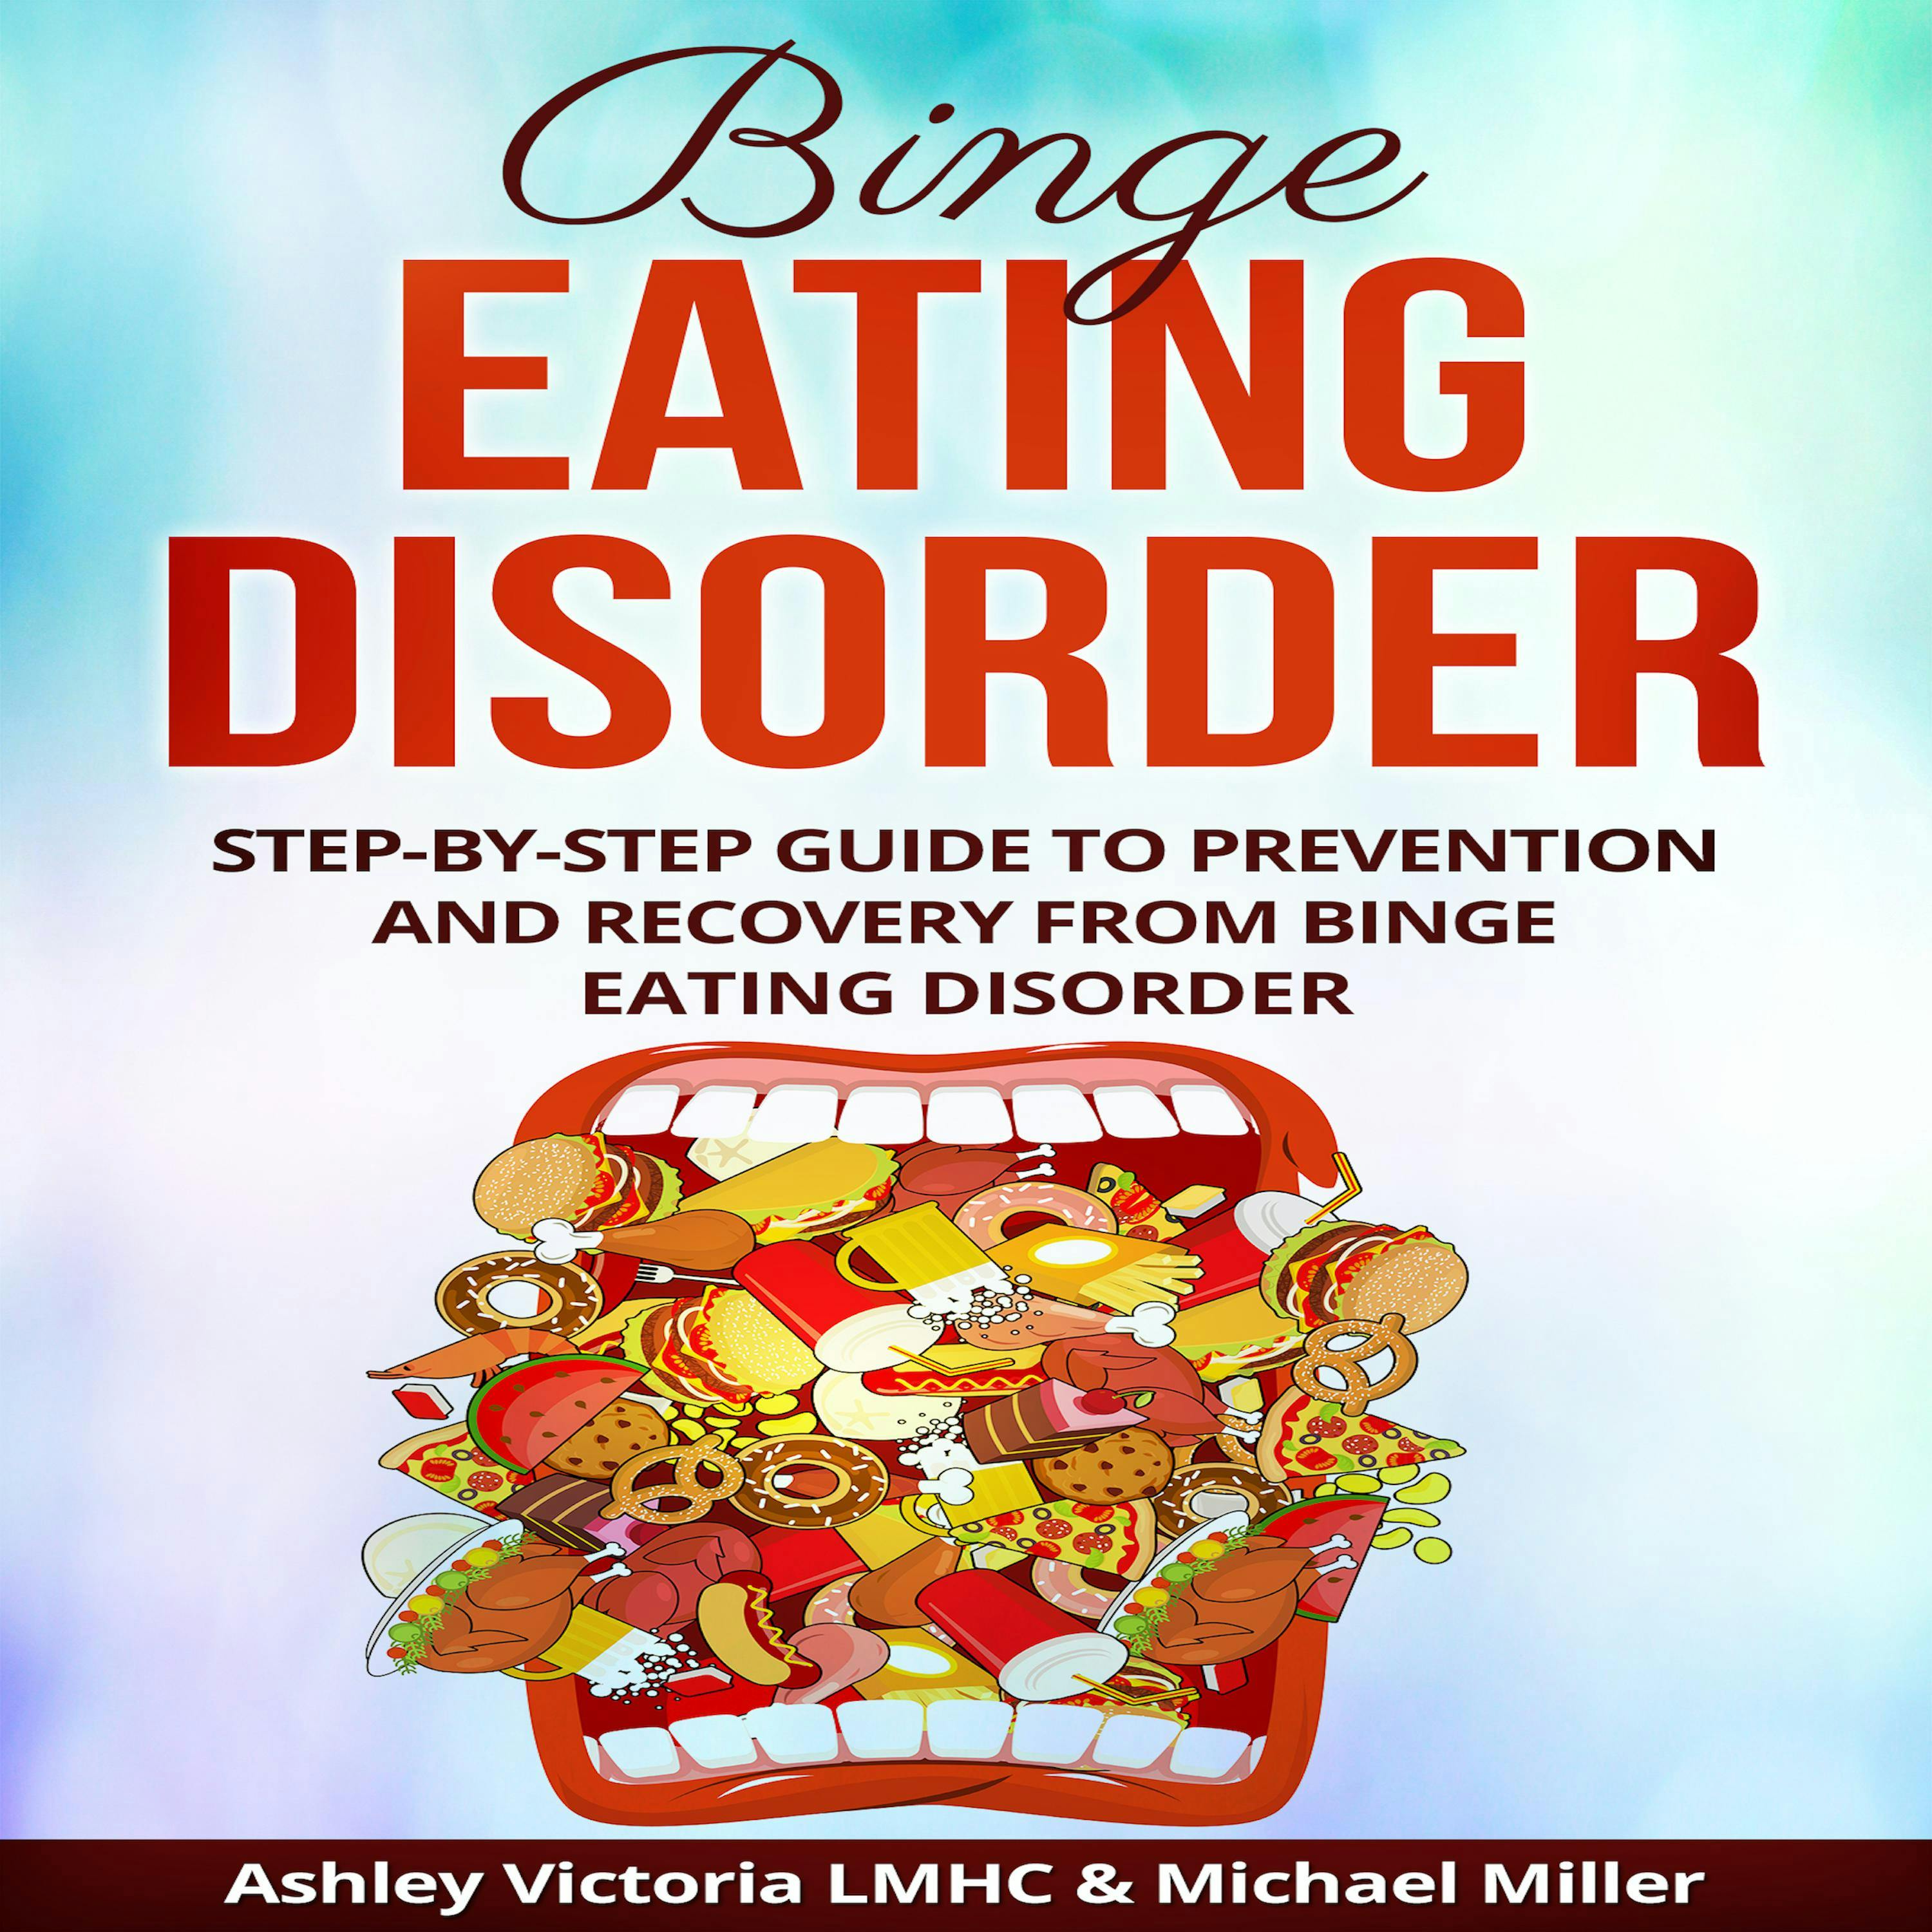 Binge Eating Disorder: Step-by-Step Guide to Prevention and Recovery from Binge Eating Disorder - Ashley Victoria LMHC Michael Miller